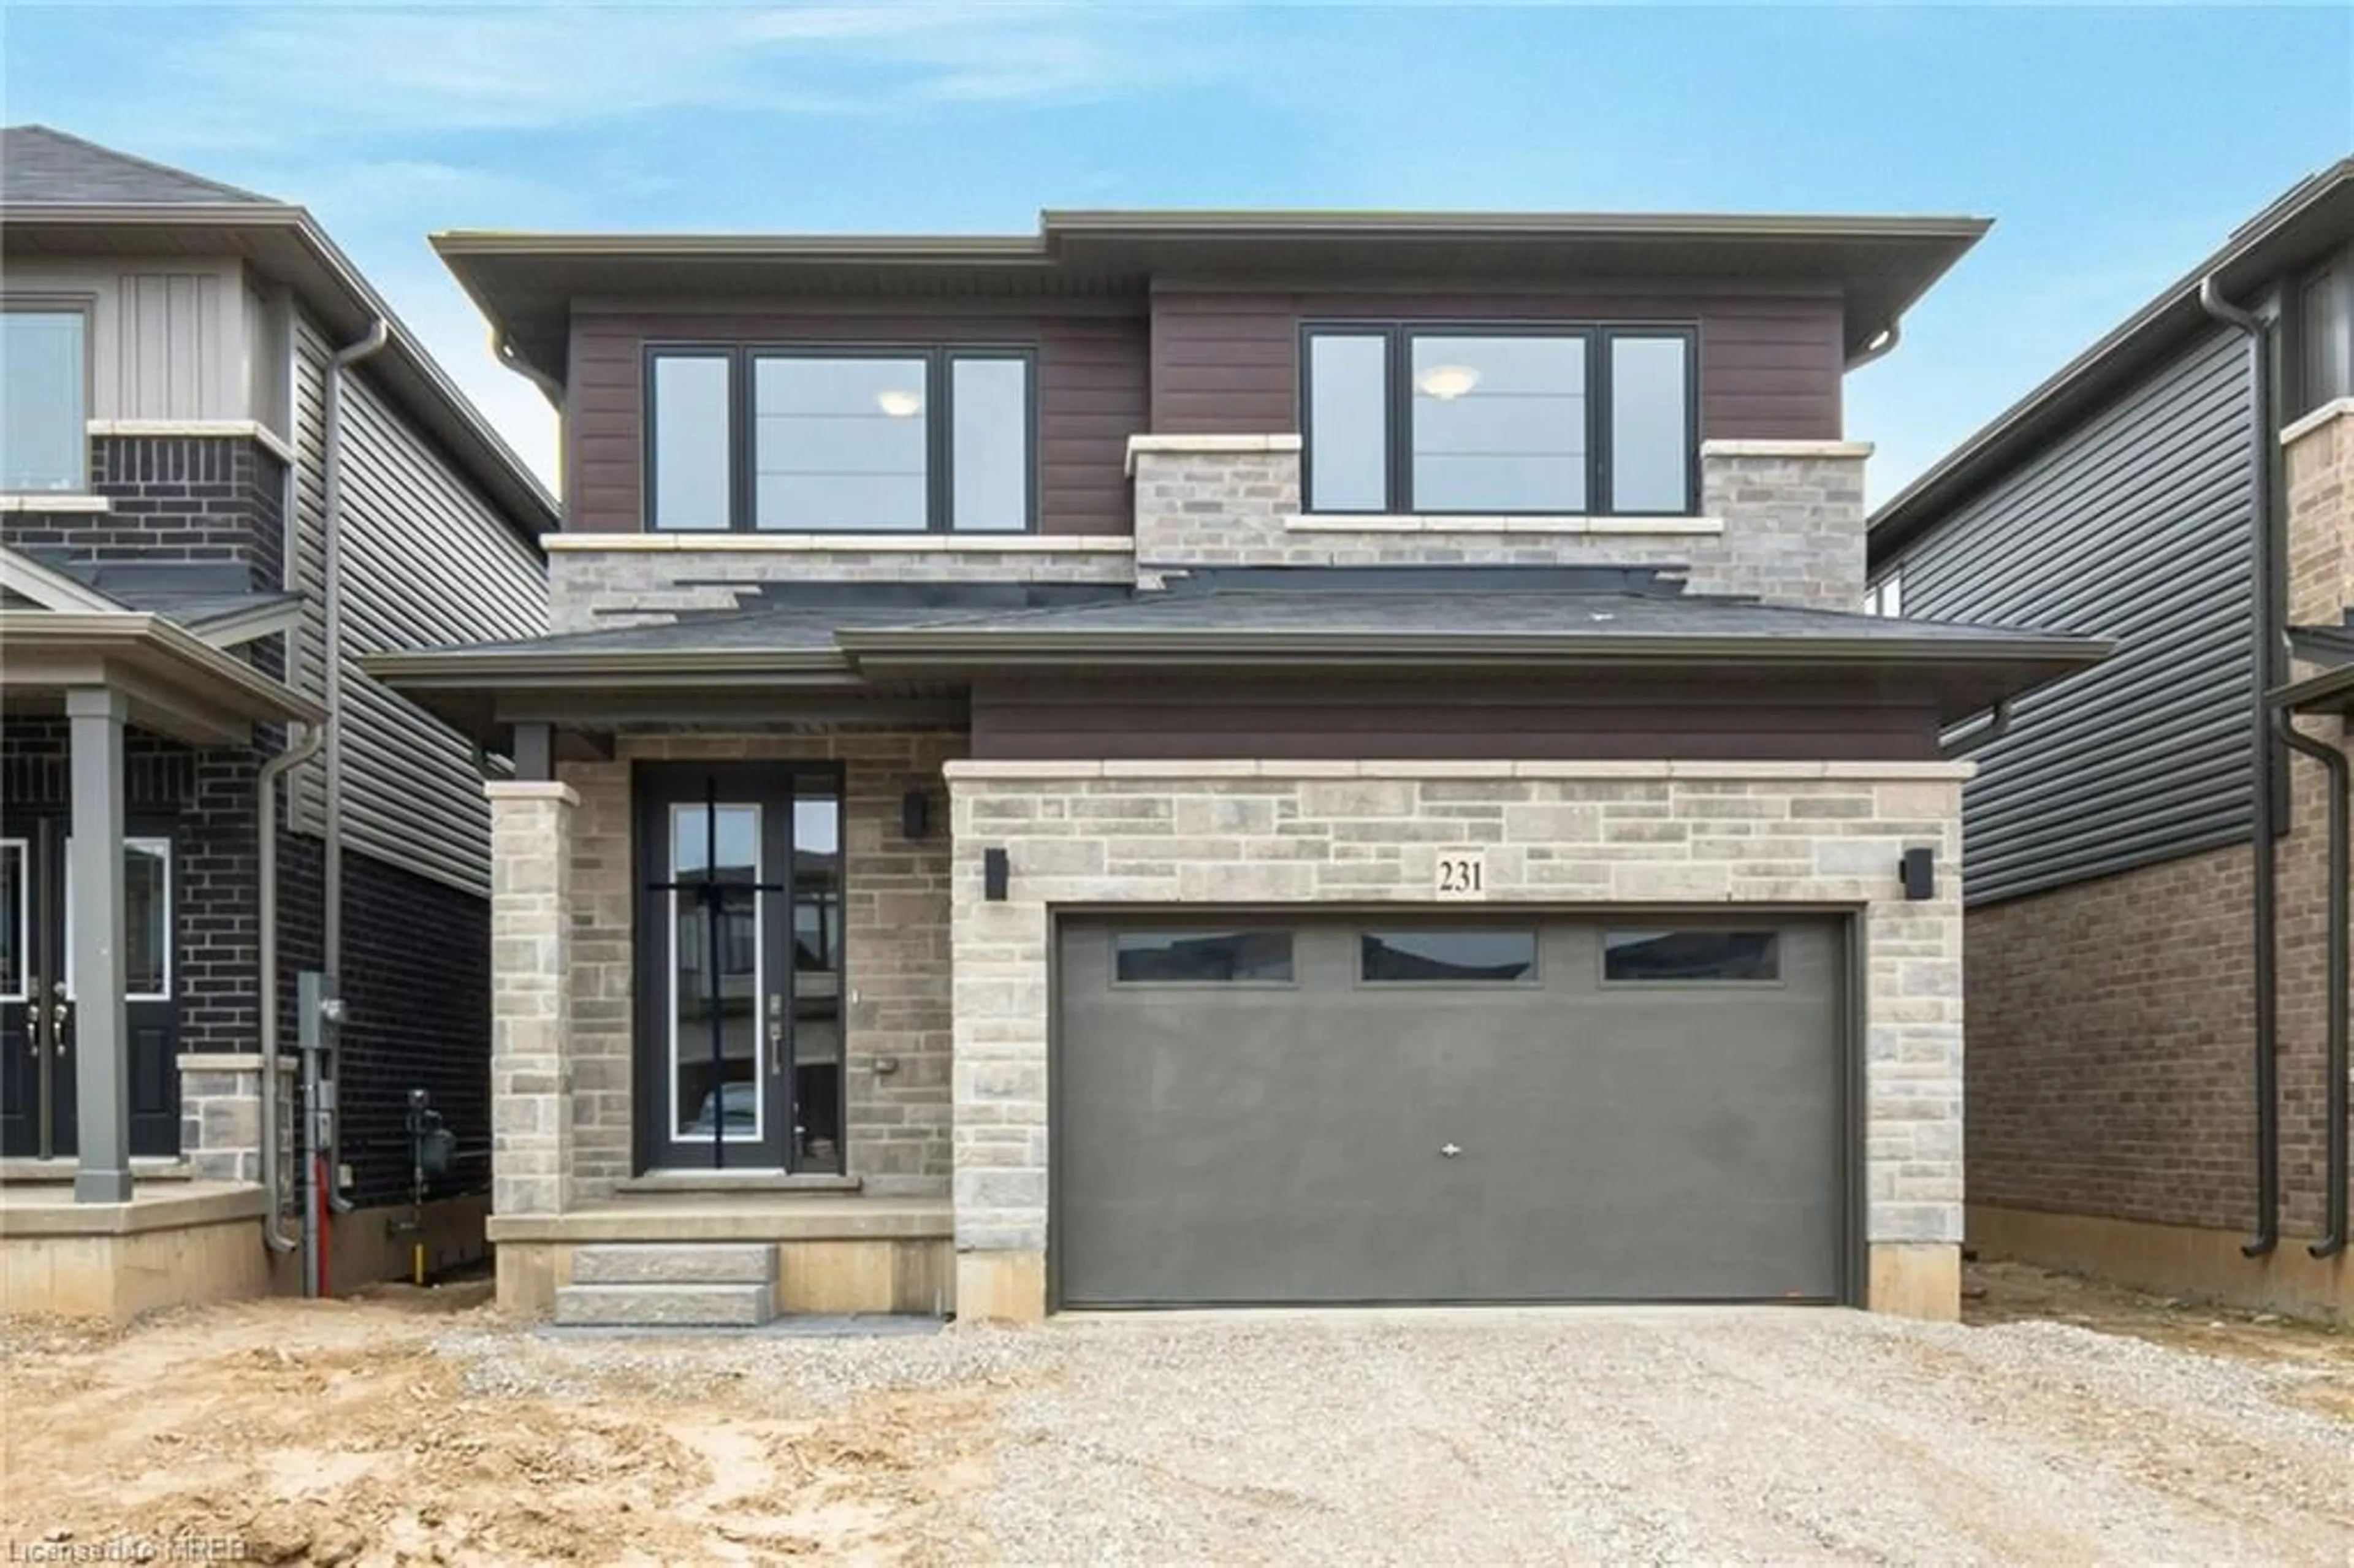 Home with brick exterior material for 231 Longboat Run, Brantford Ontario N3T 5L5